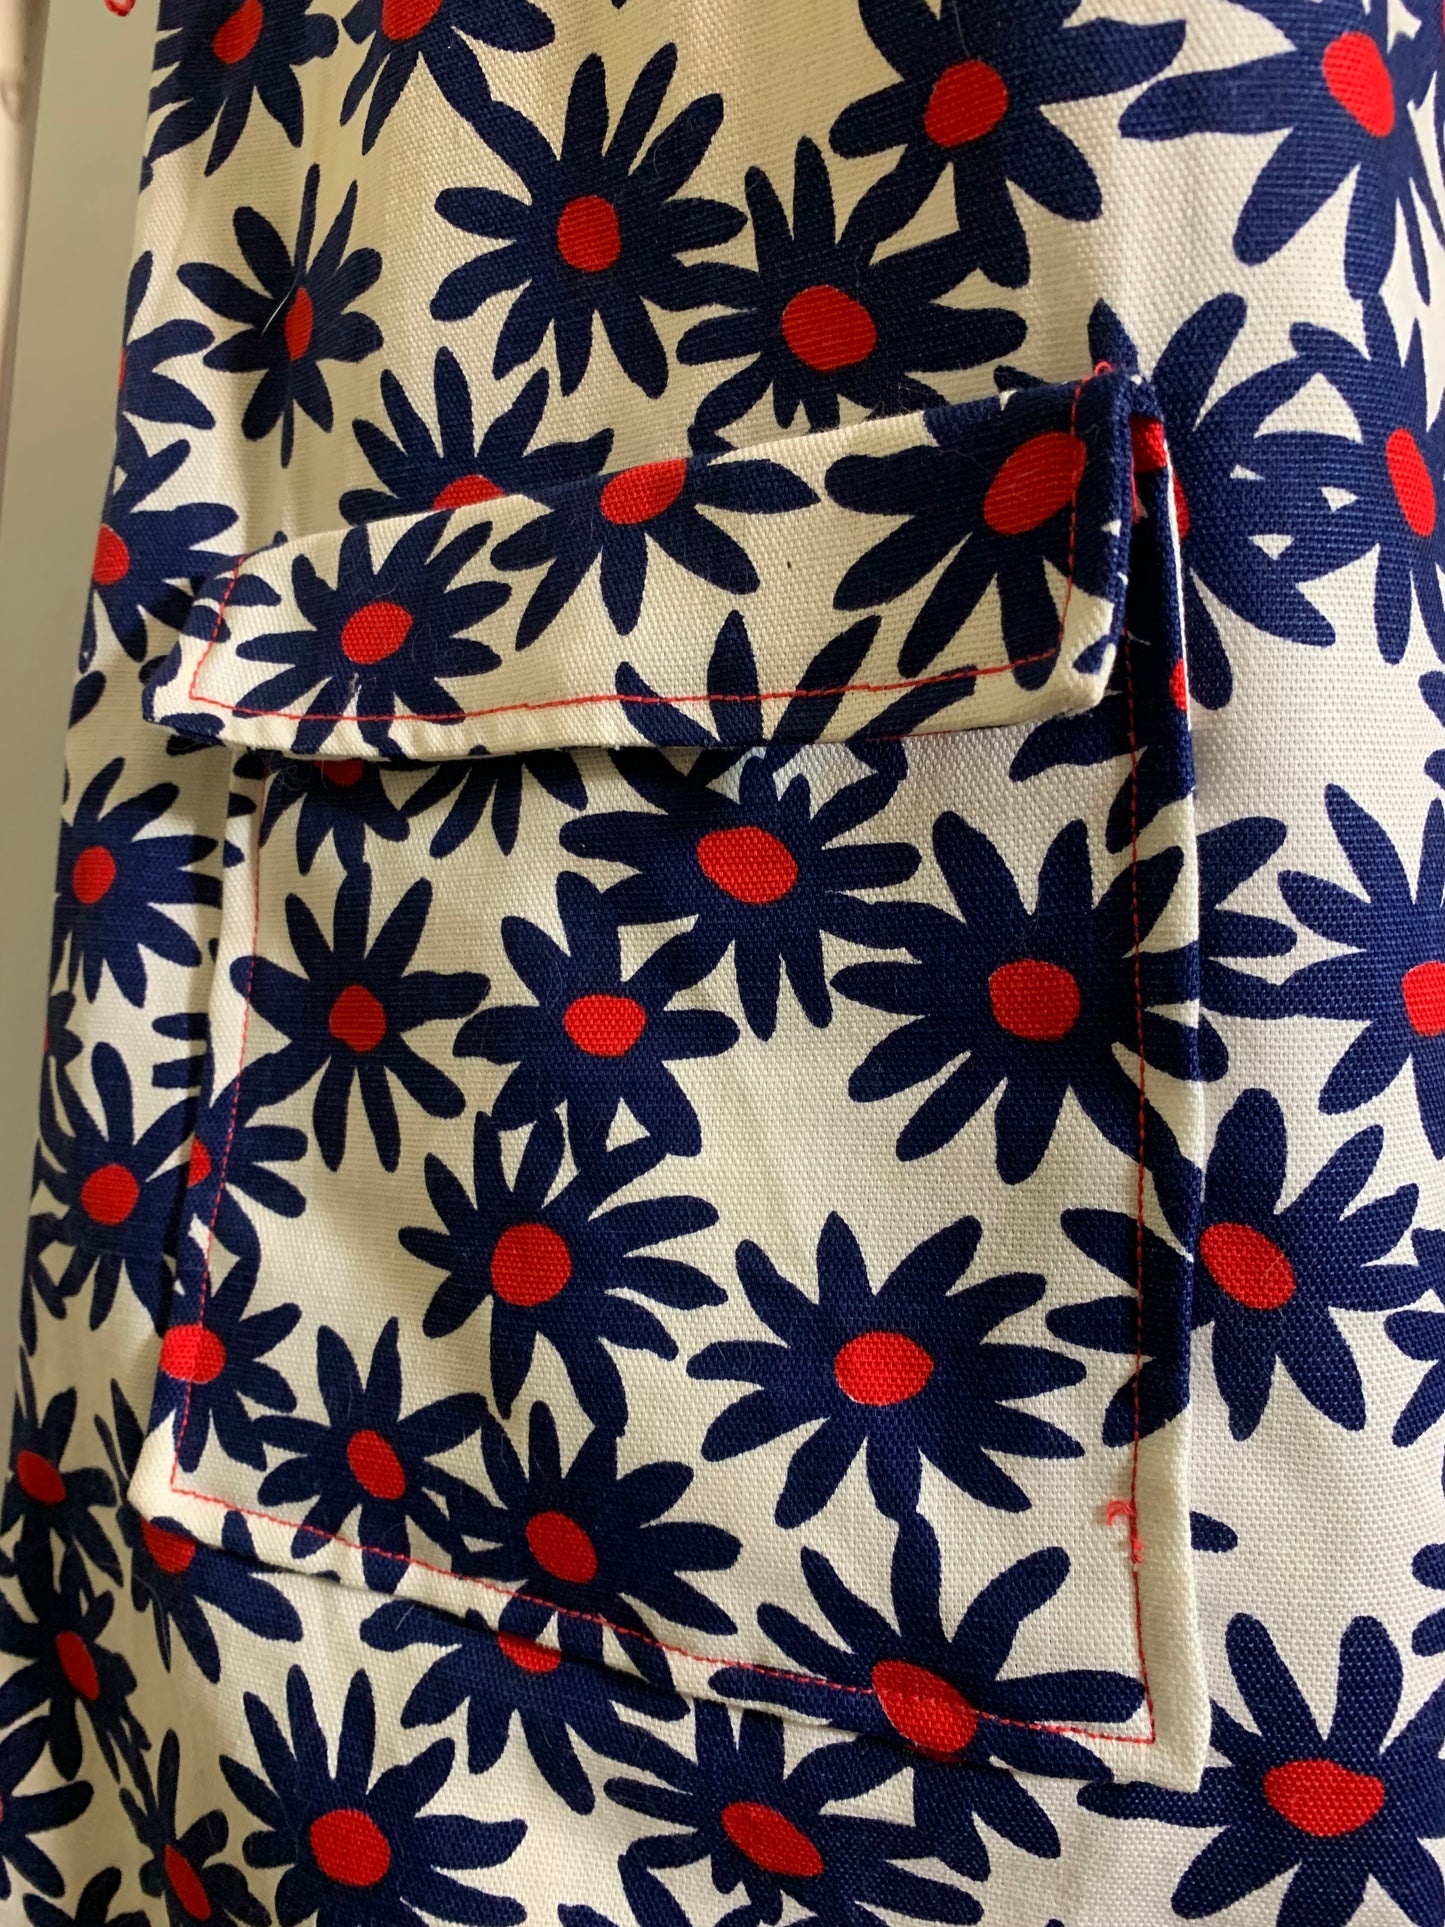 Peppy Red White and Blue Artsy Flower Print Cotton Shift Dress circa 1960s